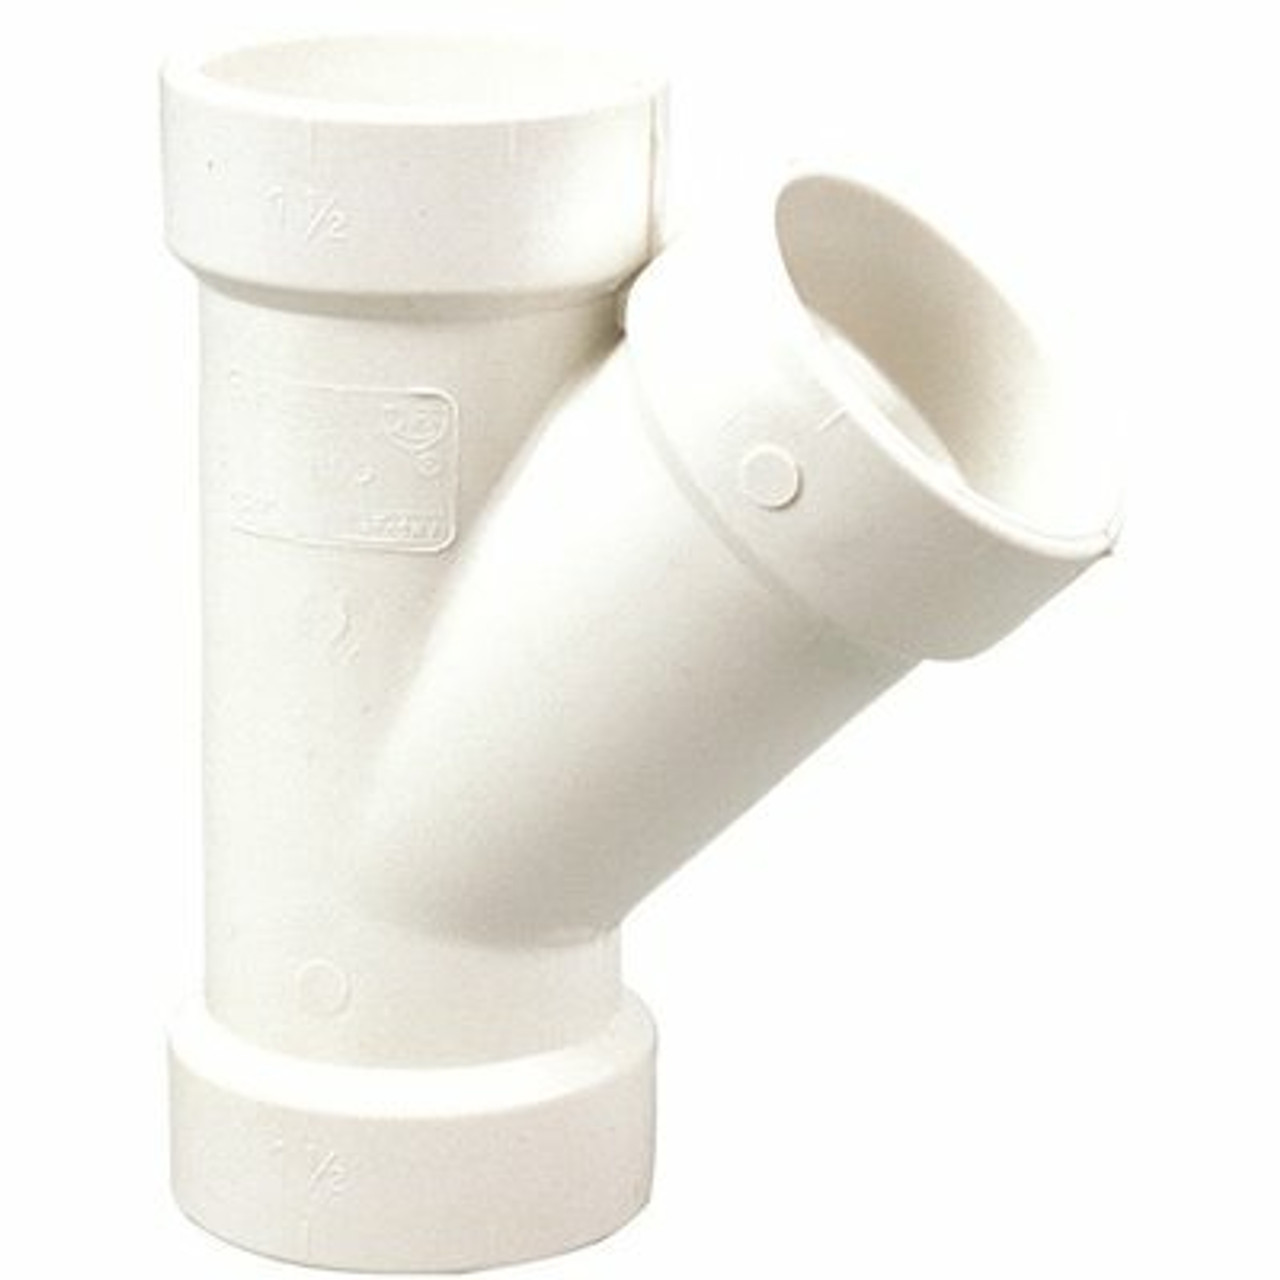 Nibco 2 in. X 1-1/2 in. X 1-1/2 in. X 1-1/2 in. Pvc Dwv Double Fixture All Hub Tee Fitting - 92305